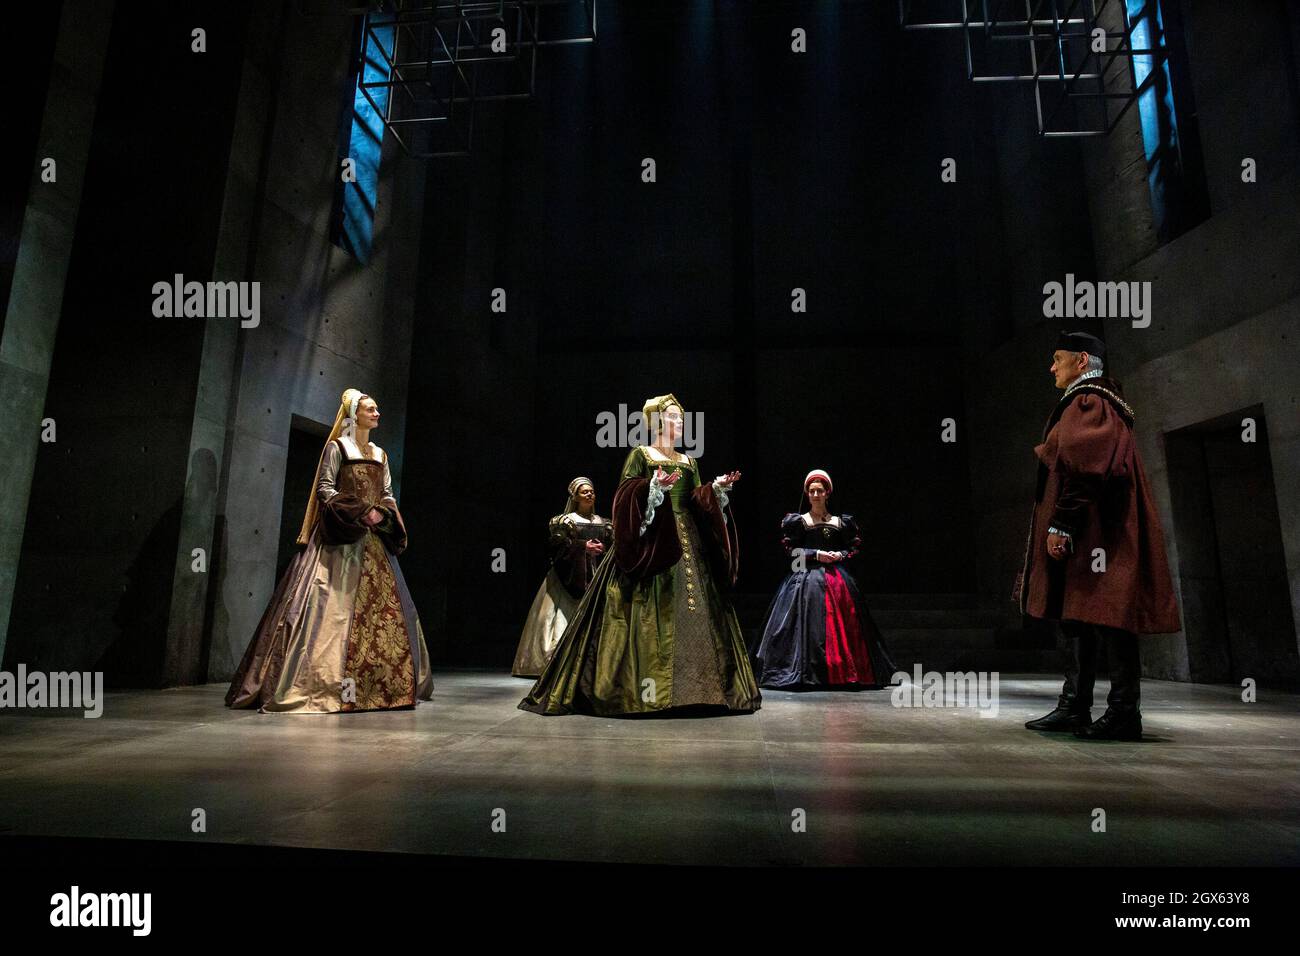 l-r: Jo Herbert (Jane, Lady Rochford), Aurora Dawson-Hunte (Elizabeth Seymour), Rosanna Adams (Anna), Olivia Marcus (Katherine Howard), Ben Miles (Thomas Cromwell) in THE MIRROR AND THE LIGHT at the Gielgud Theatre, London W1  06/10/2021  adapted from her novel by Hilary Mantel & Ben Miles  music: Stephen Warbeck  design: Christopher Oram  lighting: Jessica Hung Han Yun  movement: Emily Jane Boyle  fights: Rachid Sabitri  director: Jeremy Herrin Stock Photo